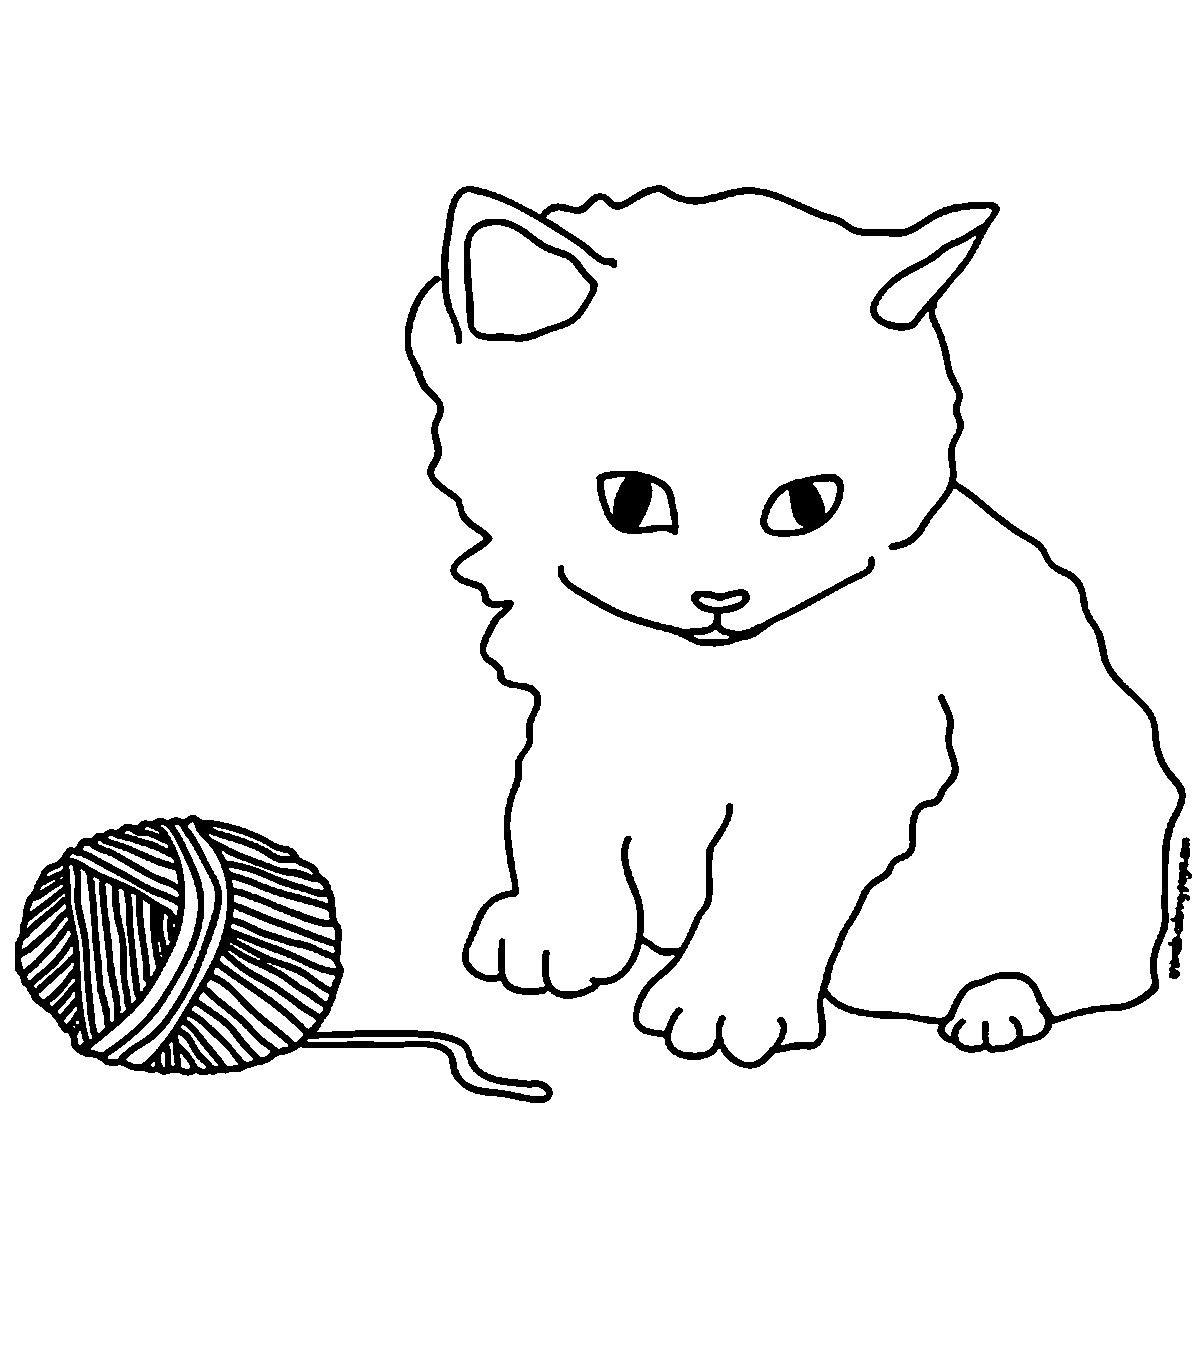 15 Lovely Kitten Coloring Pages For Your Little Ones